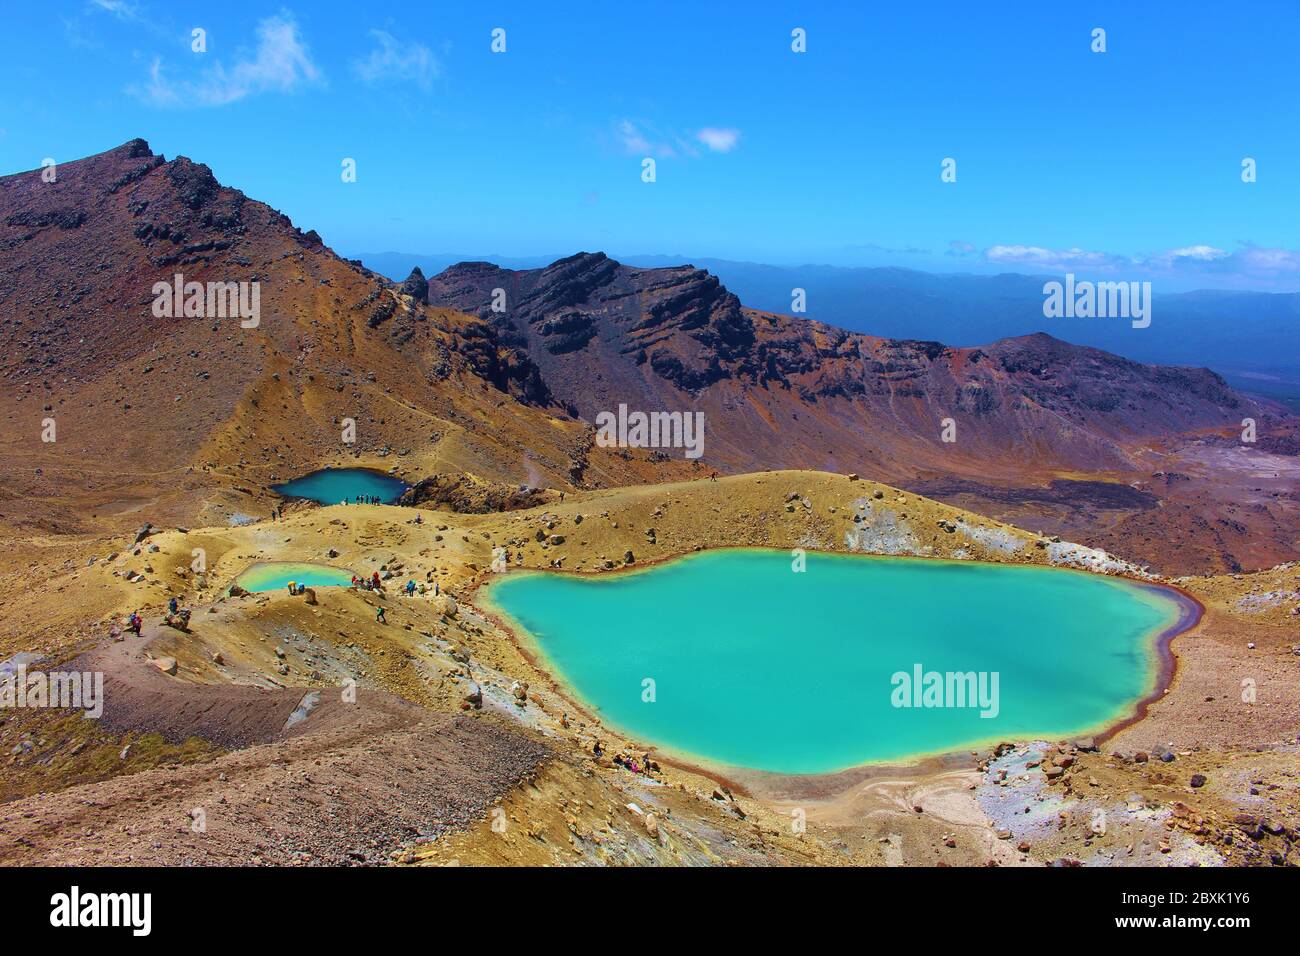 Picturesque Emerald Lake at the Volcanic Plateau of Mt. Tongariro at Tongariro Alpine Crossing in New Zealand. Geothermal activity creates the vivid t Stock Photo